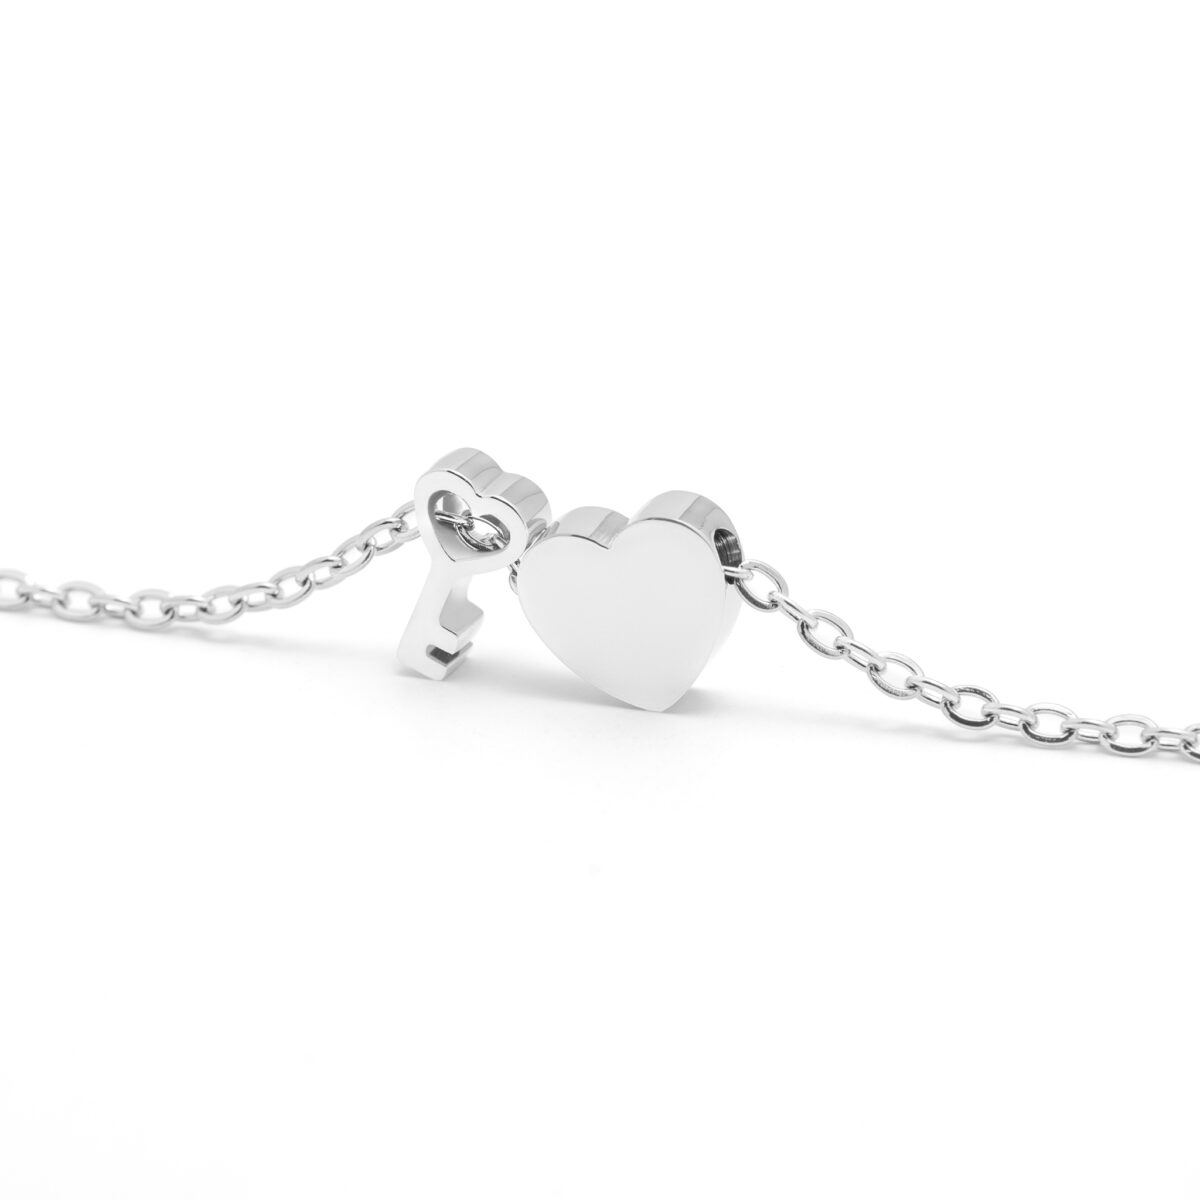 https://m.clubbella.co/product/key-to-thee-heart-silver-charm-necklace/ Key to Thee SIlver (1)